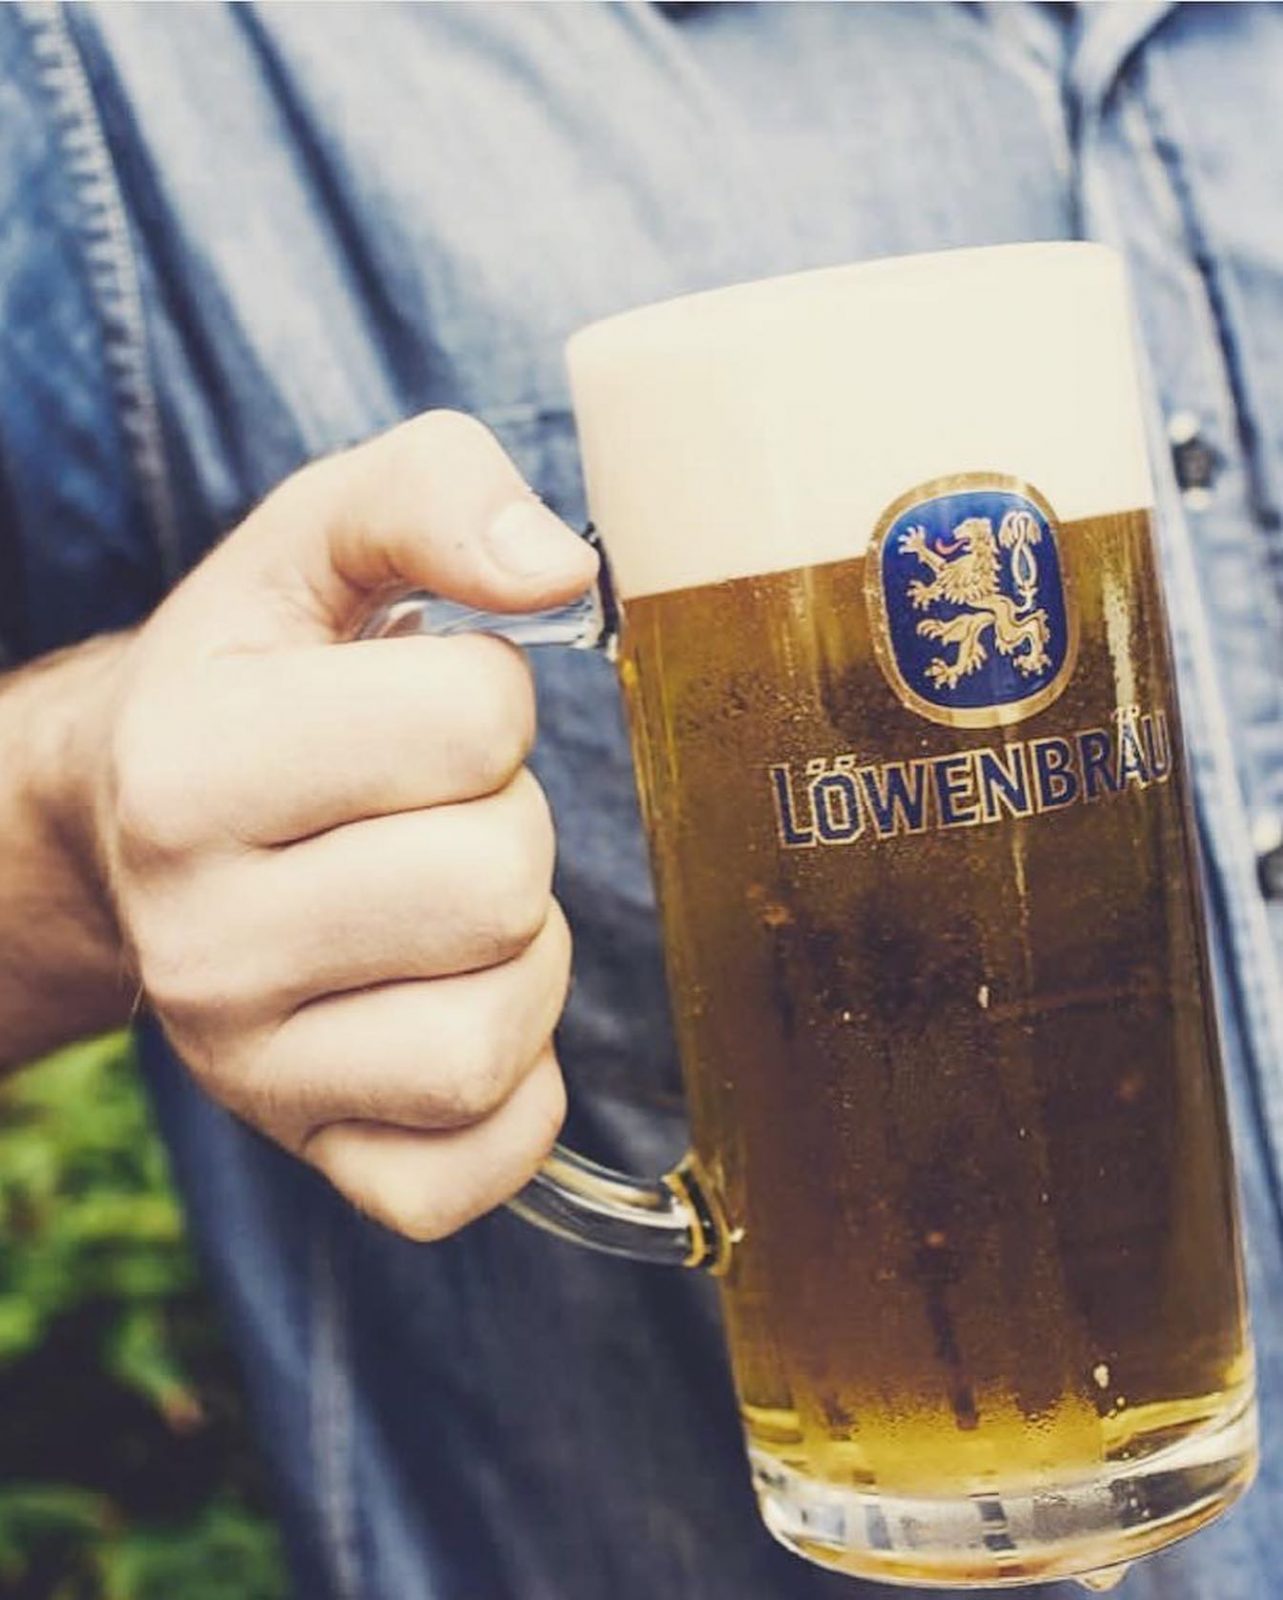 Oktoberfest is returning to Albert&#8217;s Schloss with flowing beer and a famous Manc, The Manc